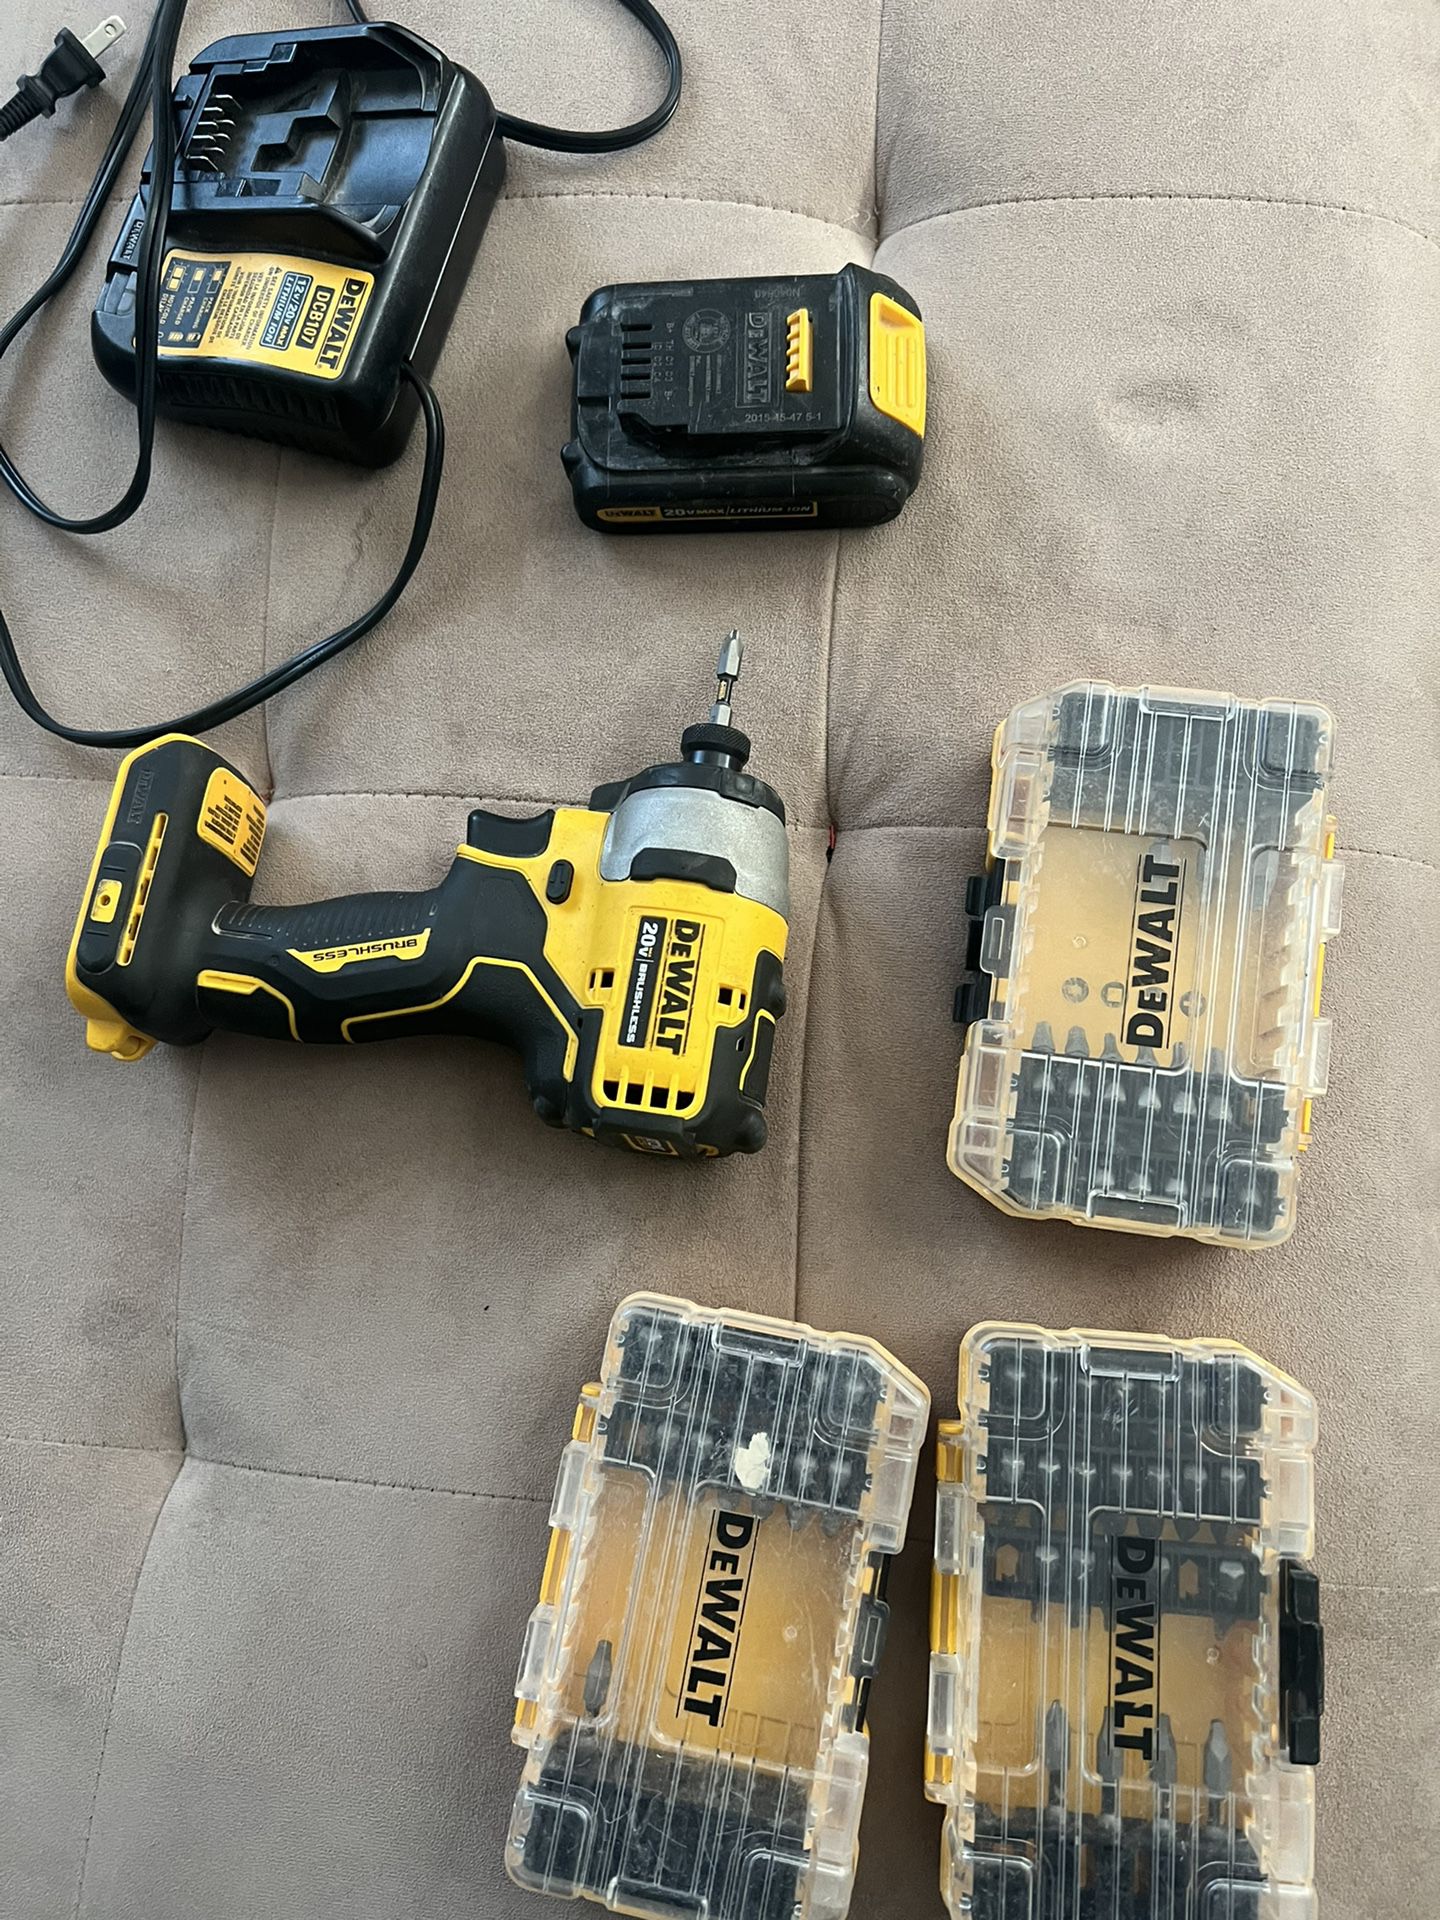 DeWalt Brushless Impact Drill , Comes With Battery And Charger ,( Dewalt Screw Bits Set Included)